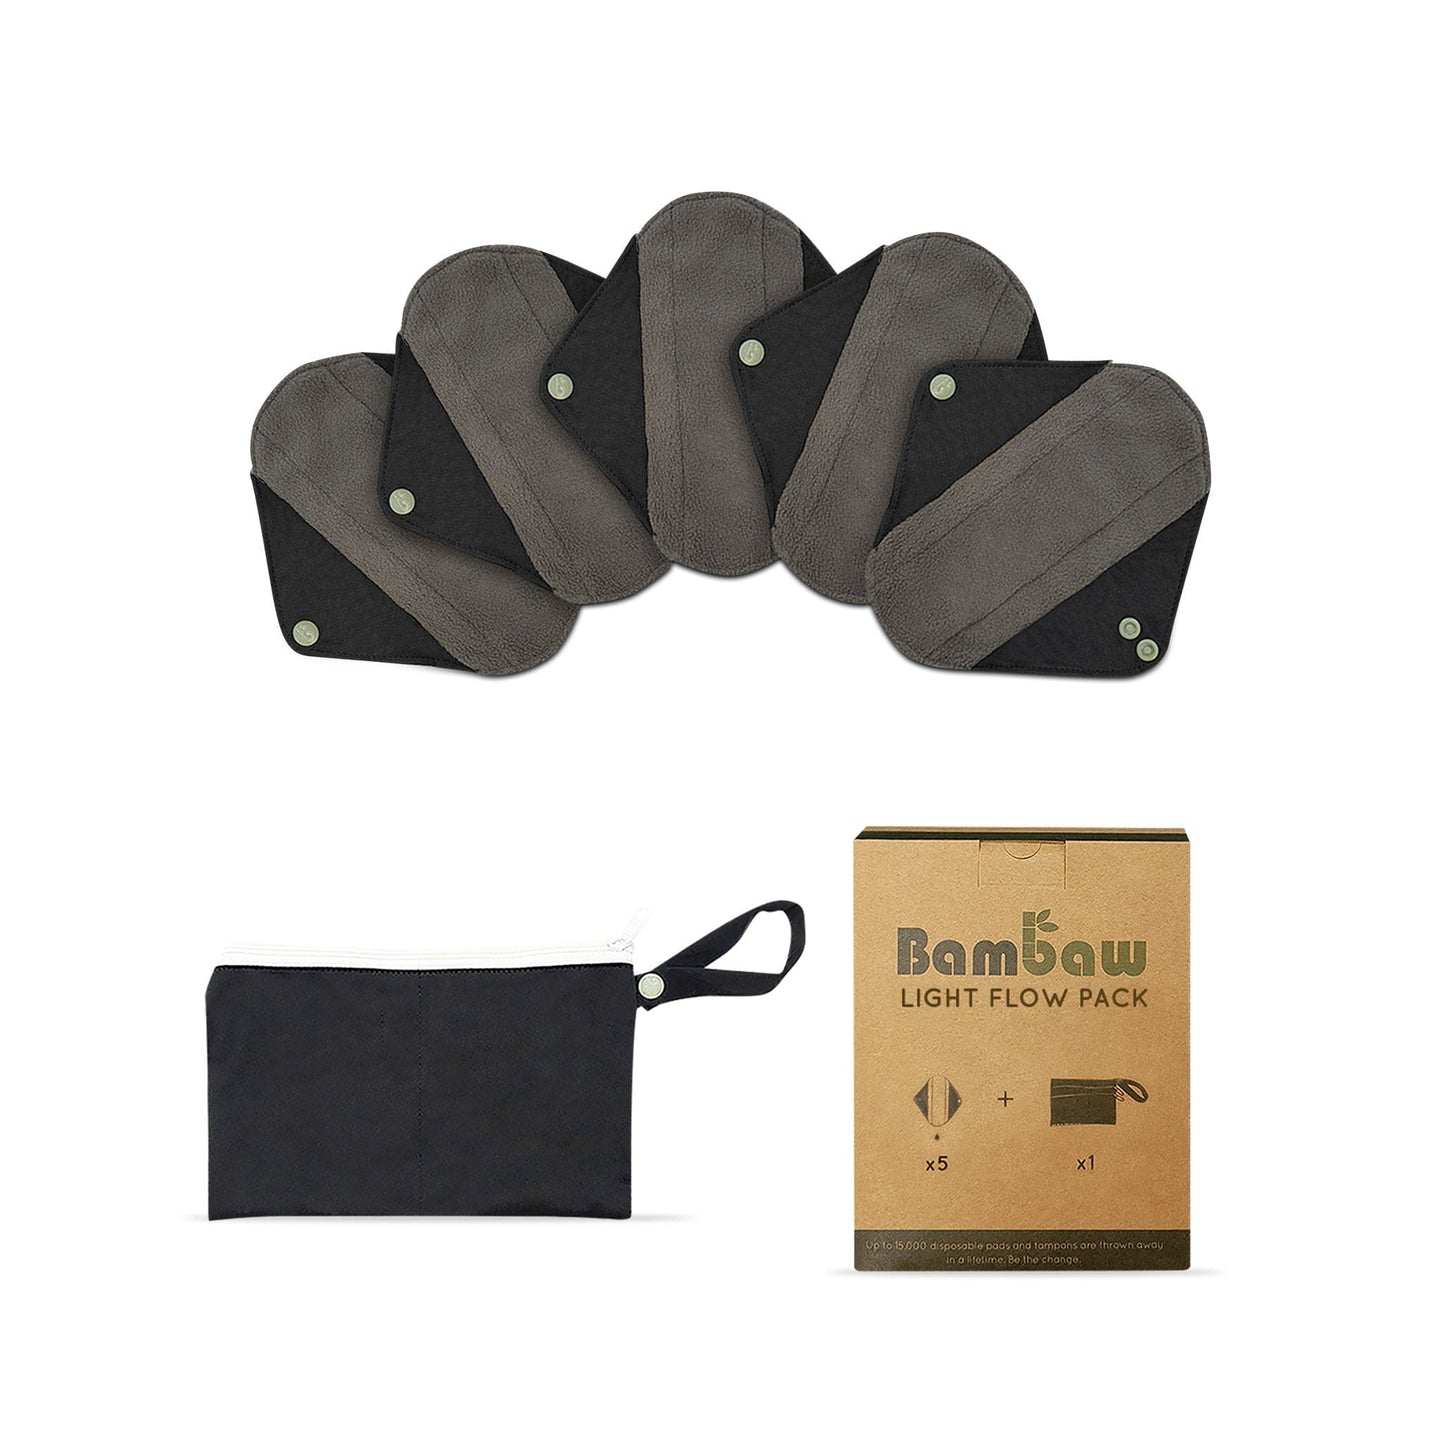 Bambaw Period Products Bamboo Charcoal Reusable Period Pads Set with Pouch - Bambaw